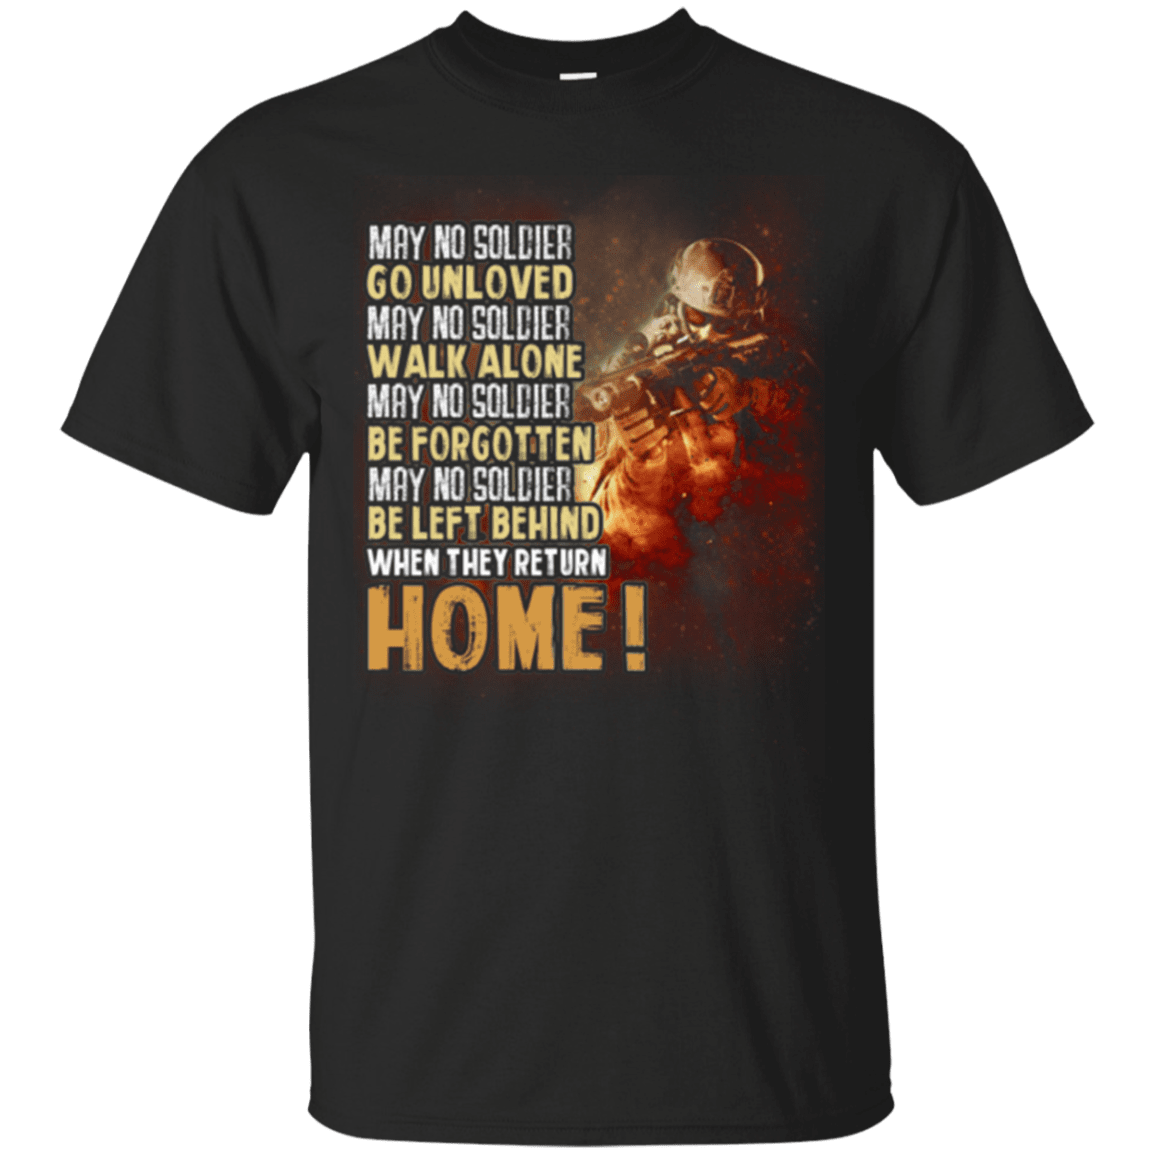 Military T-Shirt "Go Unloved, Walk Alone, Be Forgotten, Be Left Behind, Home"-TShirt-General-Veterans Nation